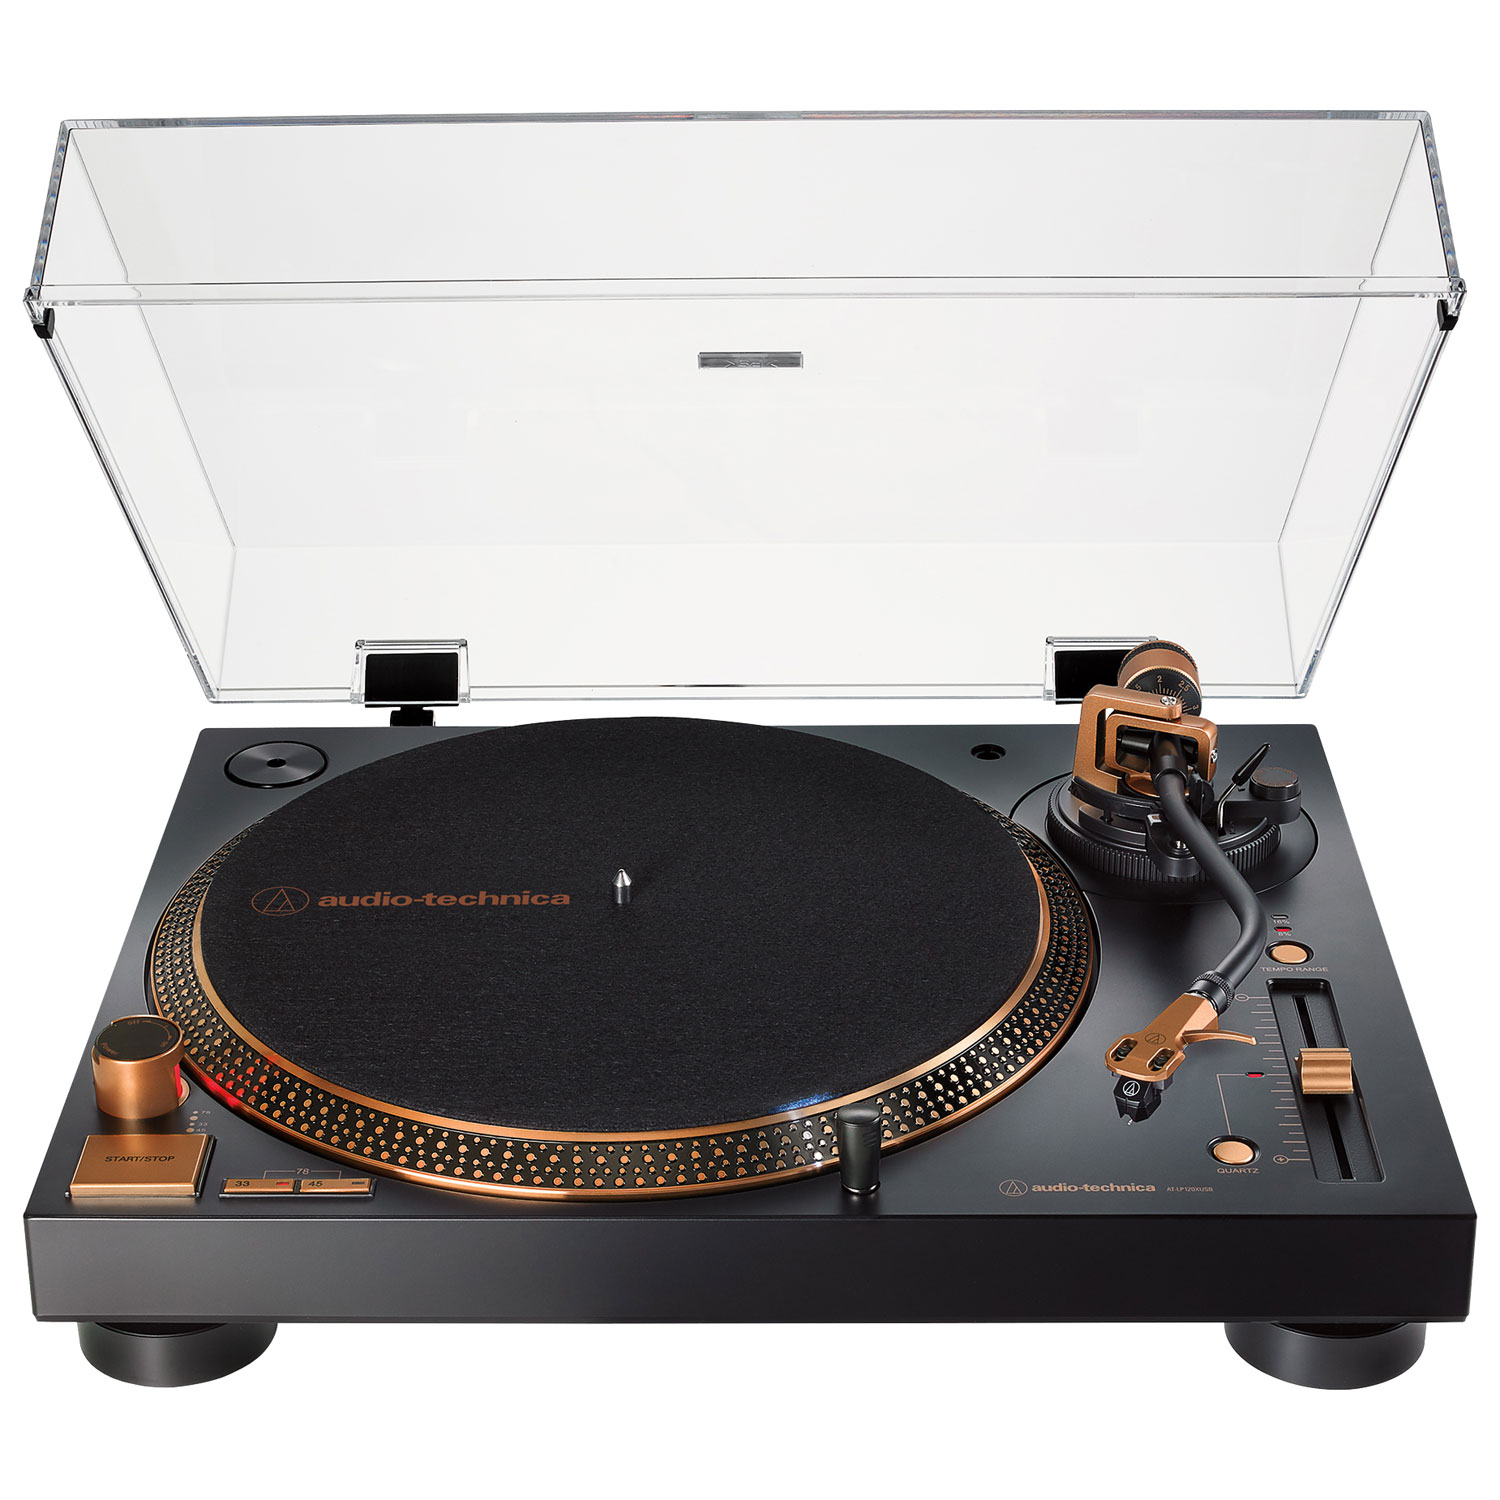 Audio-Technica AT-LP120XUSB-BZ Direct-Drive Turntable , Fully Manual, Hi-Fi, 3 Speed, Convert Vinyl To Digital, Anti-Skate And Variable Pitch Control